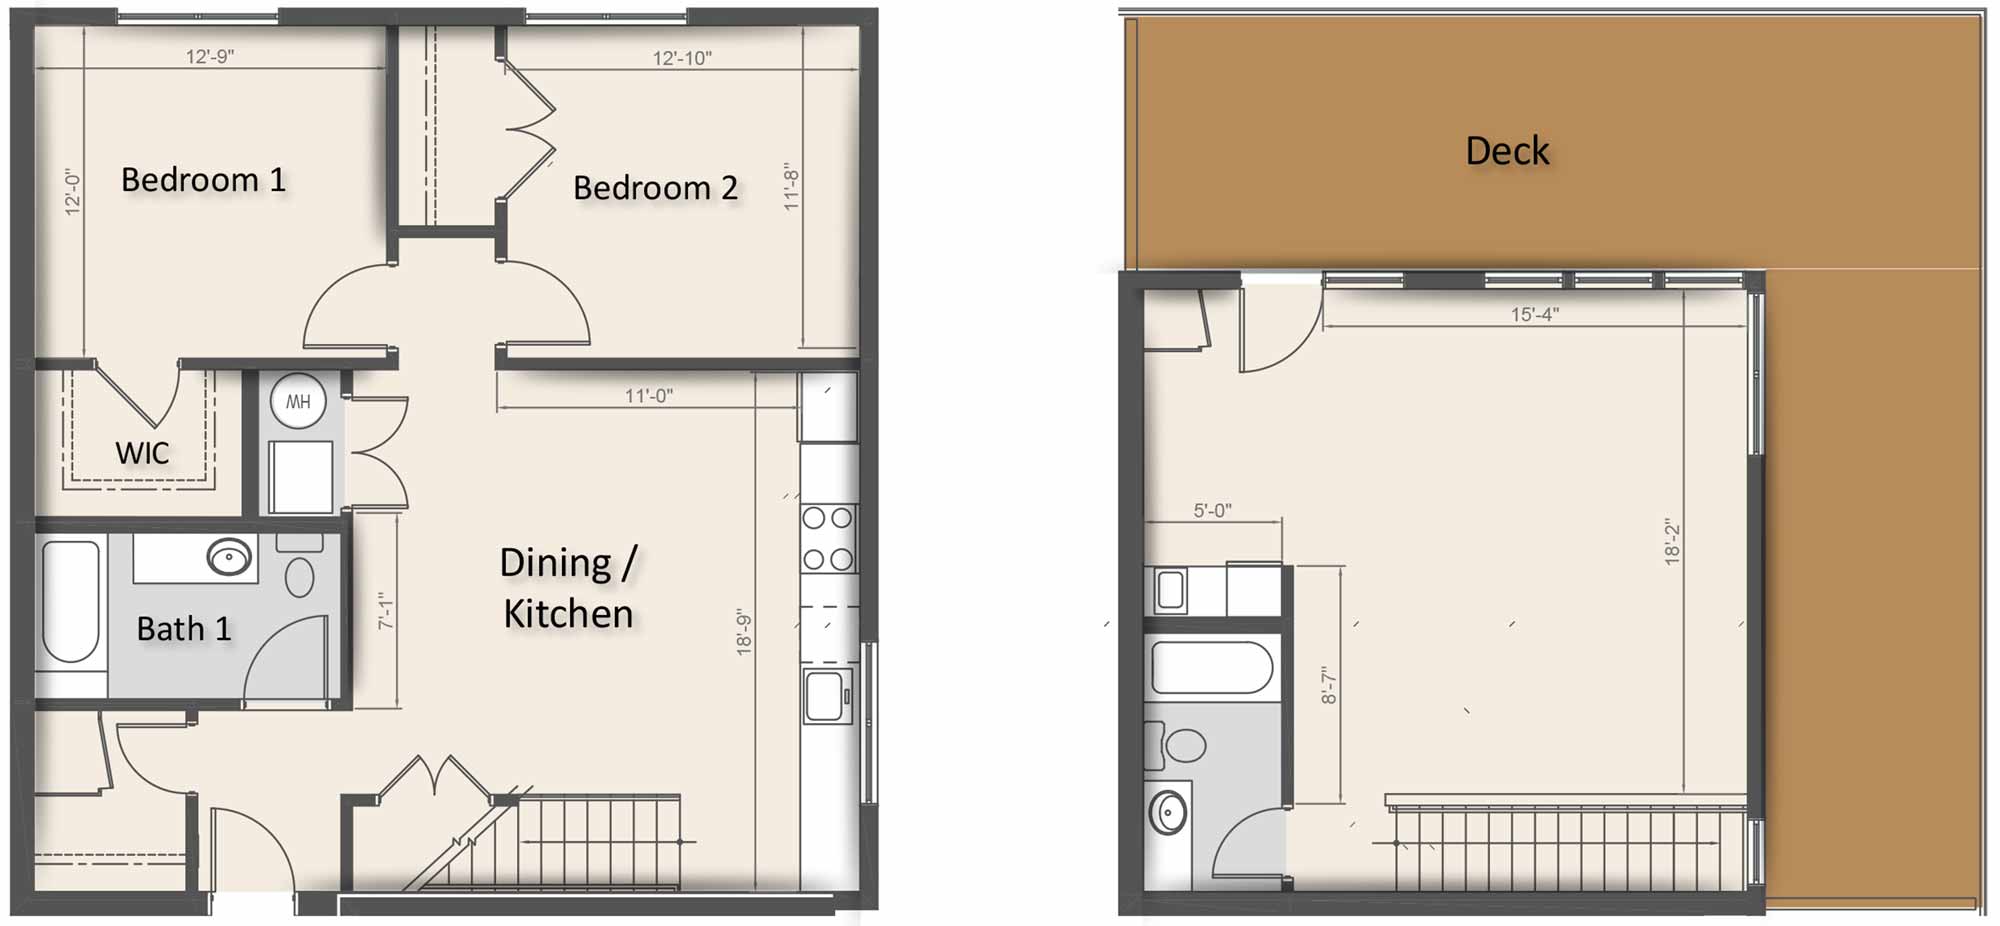 UNIT 407 TWO BEDROOM (1,404 SF + 456 SF DECK)